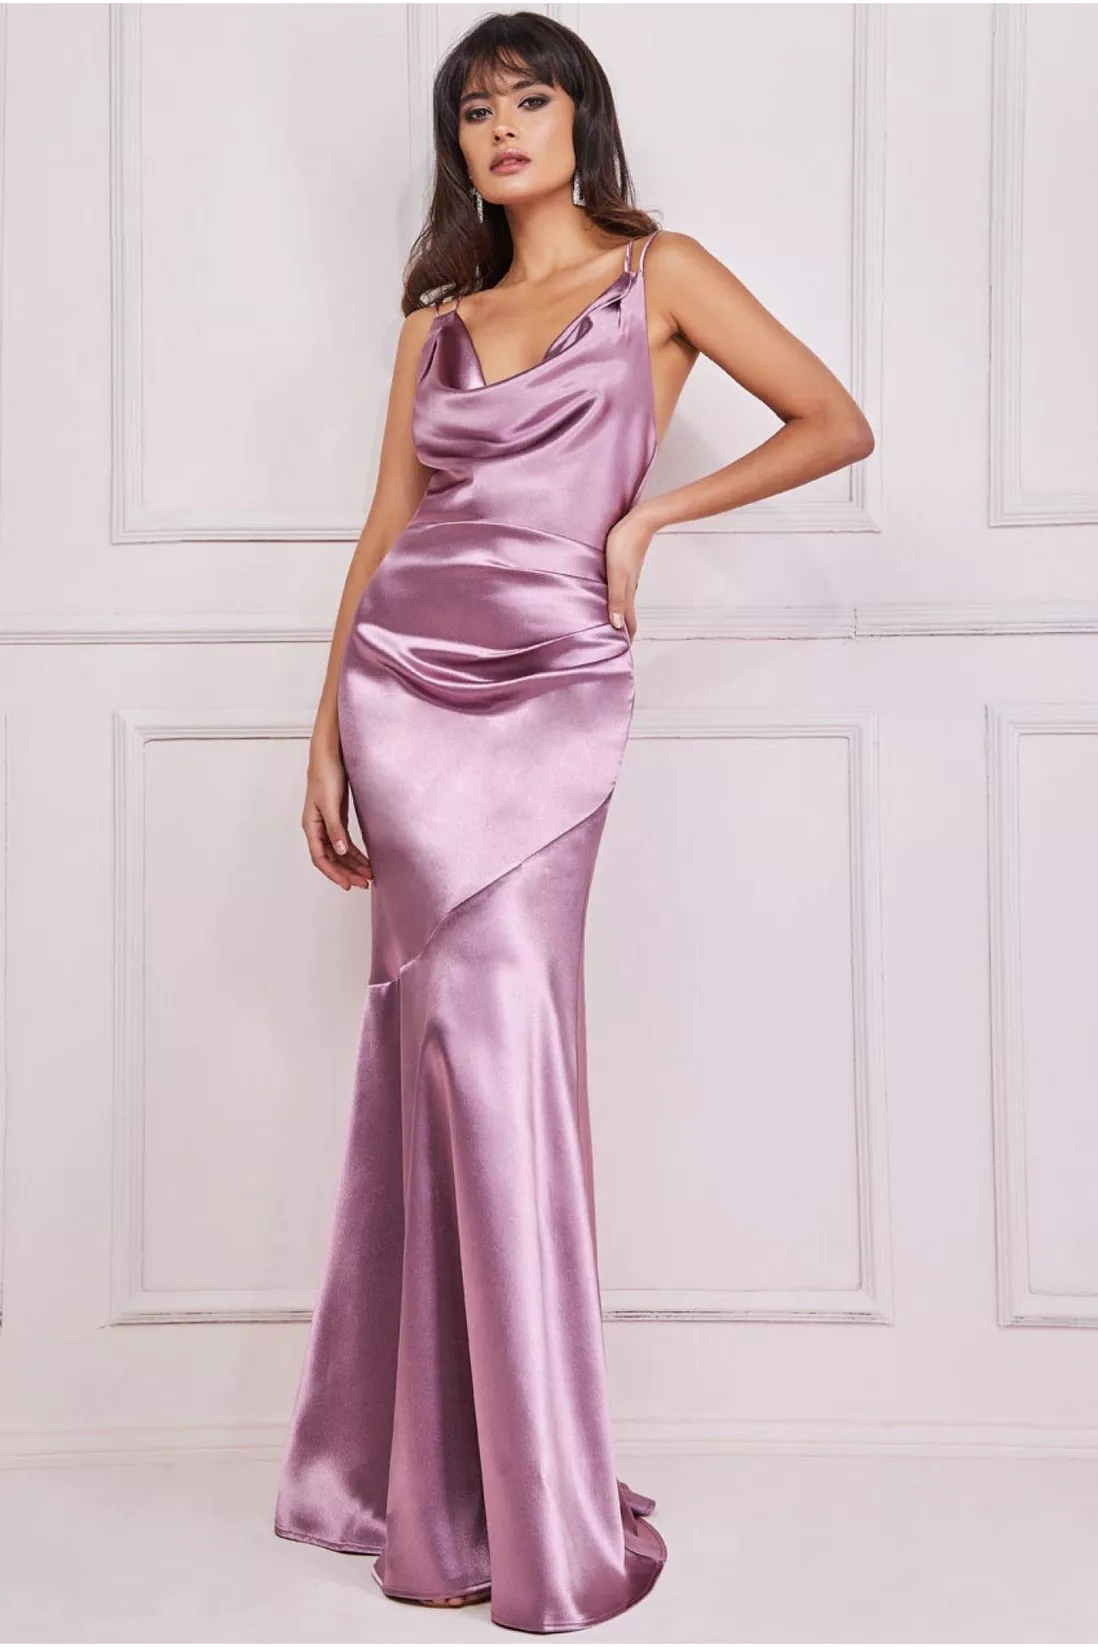 Explore our curated selection of formal maxi dresses, perfect for elevating your evening attire. From the elegance of satin to the sparkle of sequins, find your ideal gown for any sophisticated event. Formal Maxi Dresses | Formal Maxi Dress | Formal Maxy Dress | Prom Dress | Wedding Guest Dress | Formal Dress | Black Prom Dress | Black Dress | Red Dress | Maxi Dress | Dress To Impression | Green Prom Dress | Classy Prom Dress | Green Dress | Blue Dress | Floral Dress | Long Dress